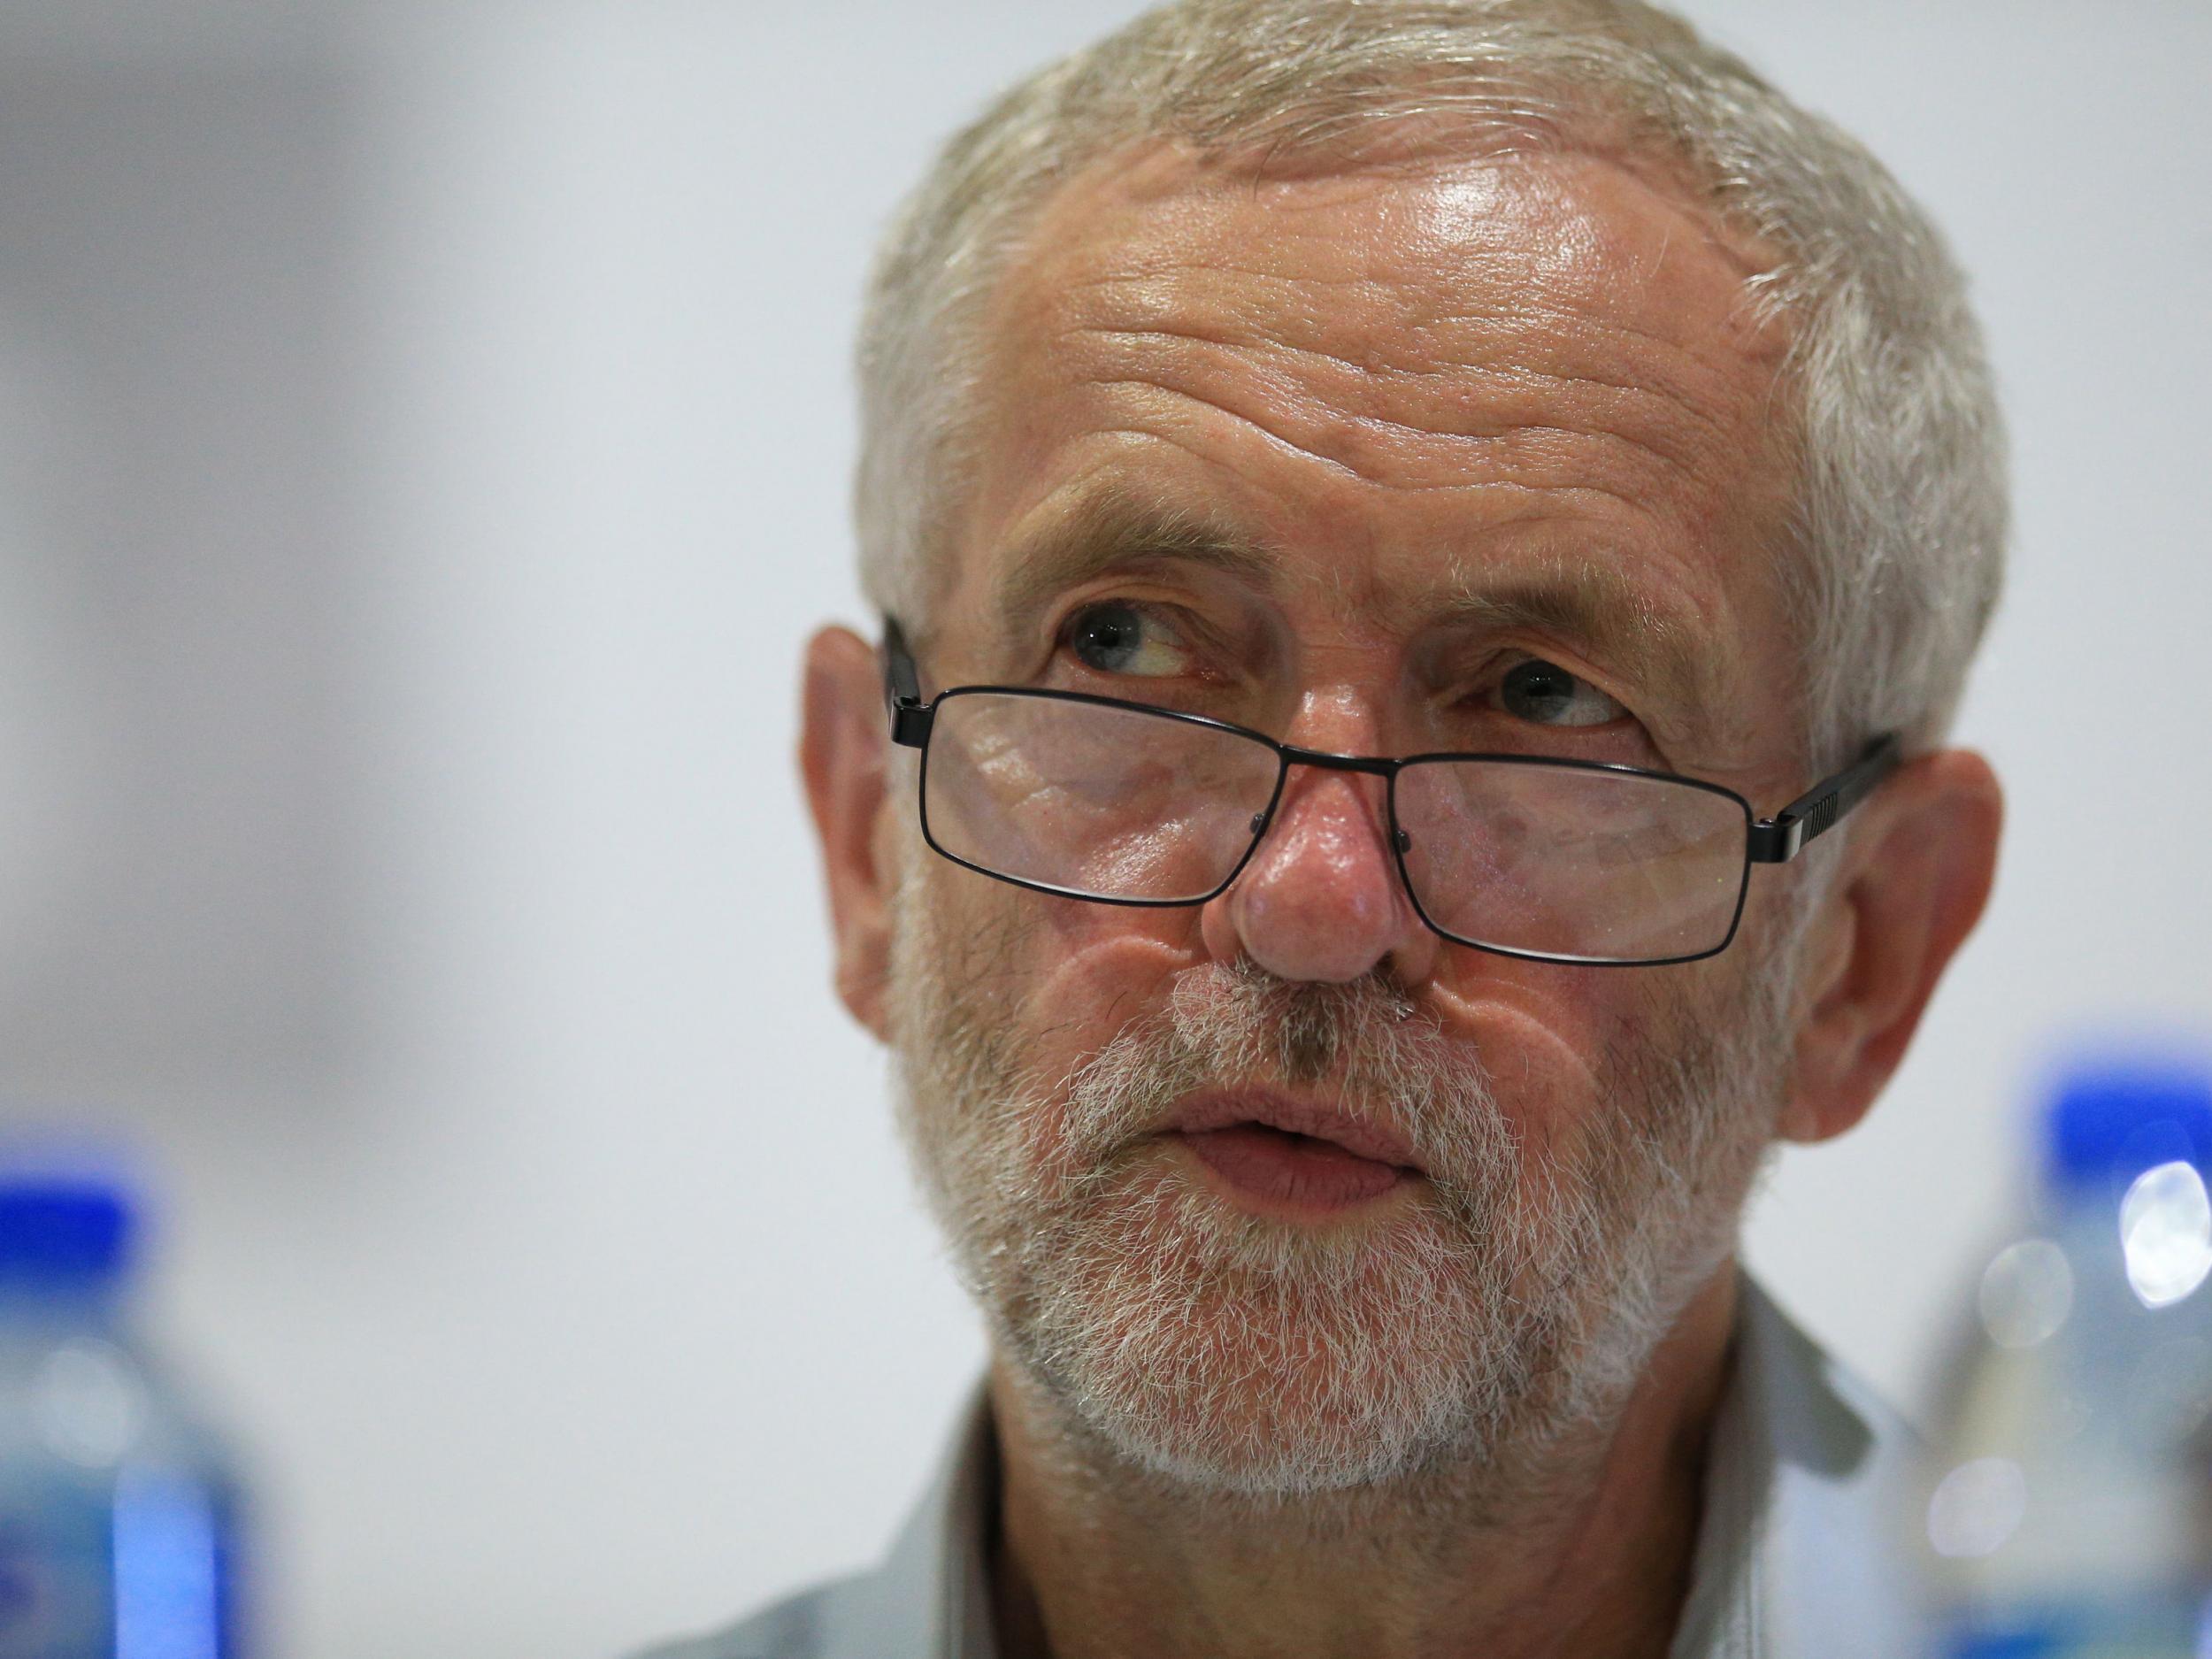 Mr Corbyn is set to be in talks with former shadow cabinet ministers about their return